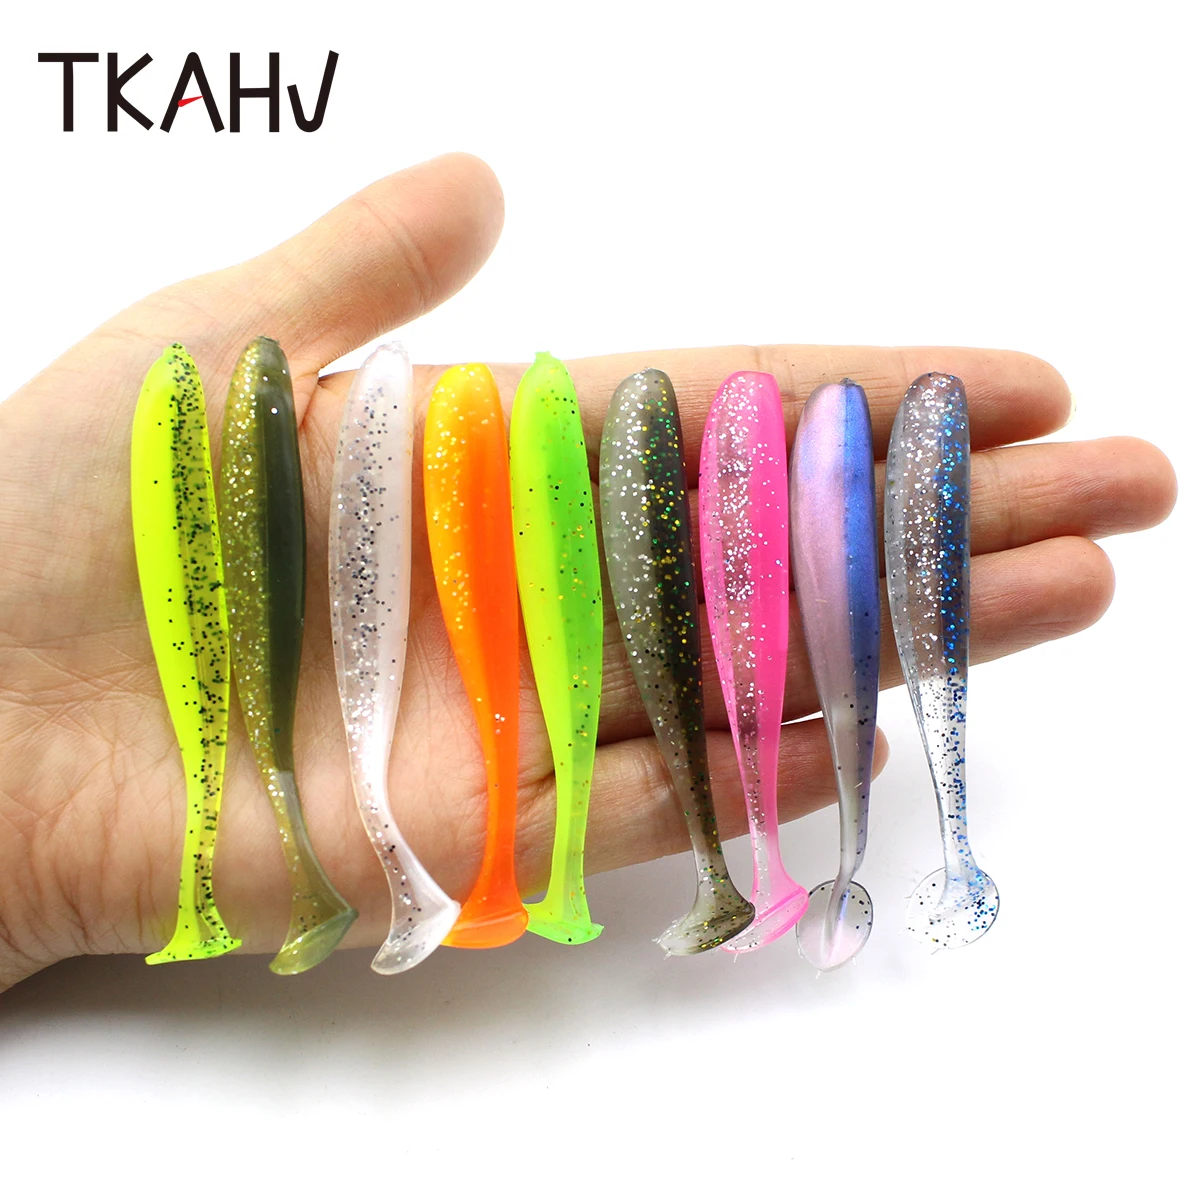 

TKAHV 20pcs/Pack 2.2g Shad Fishing Lure T Tail Jig Wobbler Soft Worm Bait Bass Carp Swimbait Pike Silicone Artificial Tackle Set